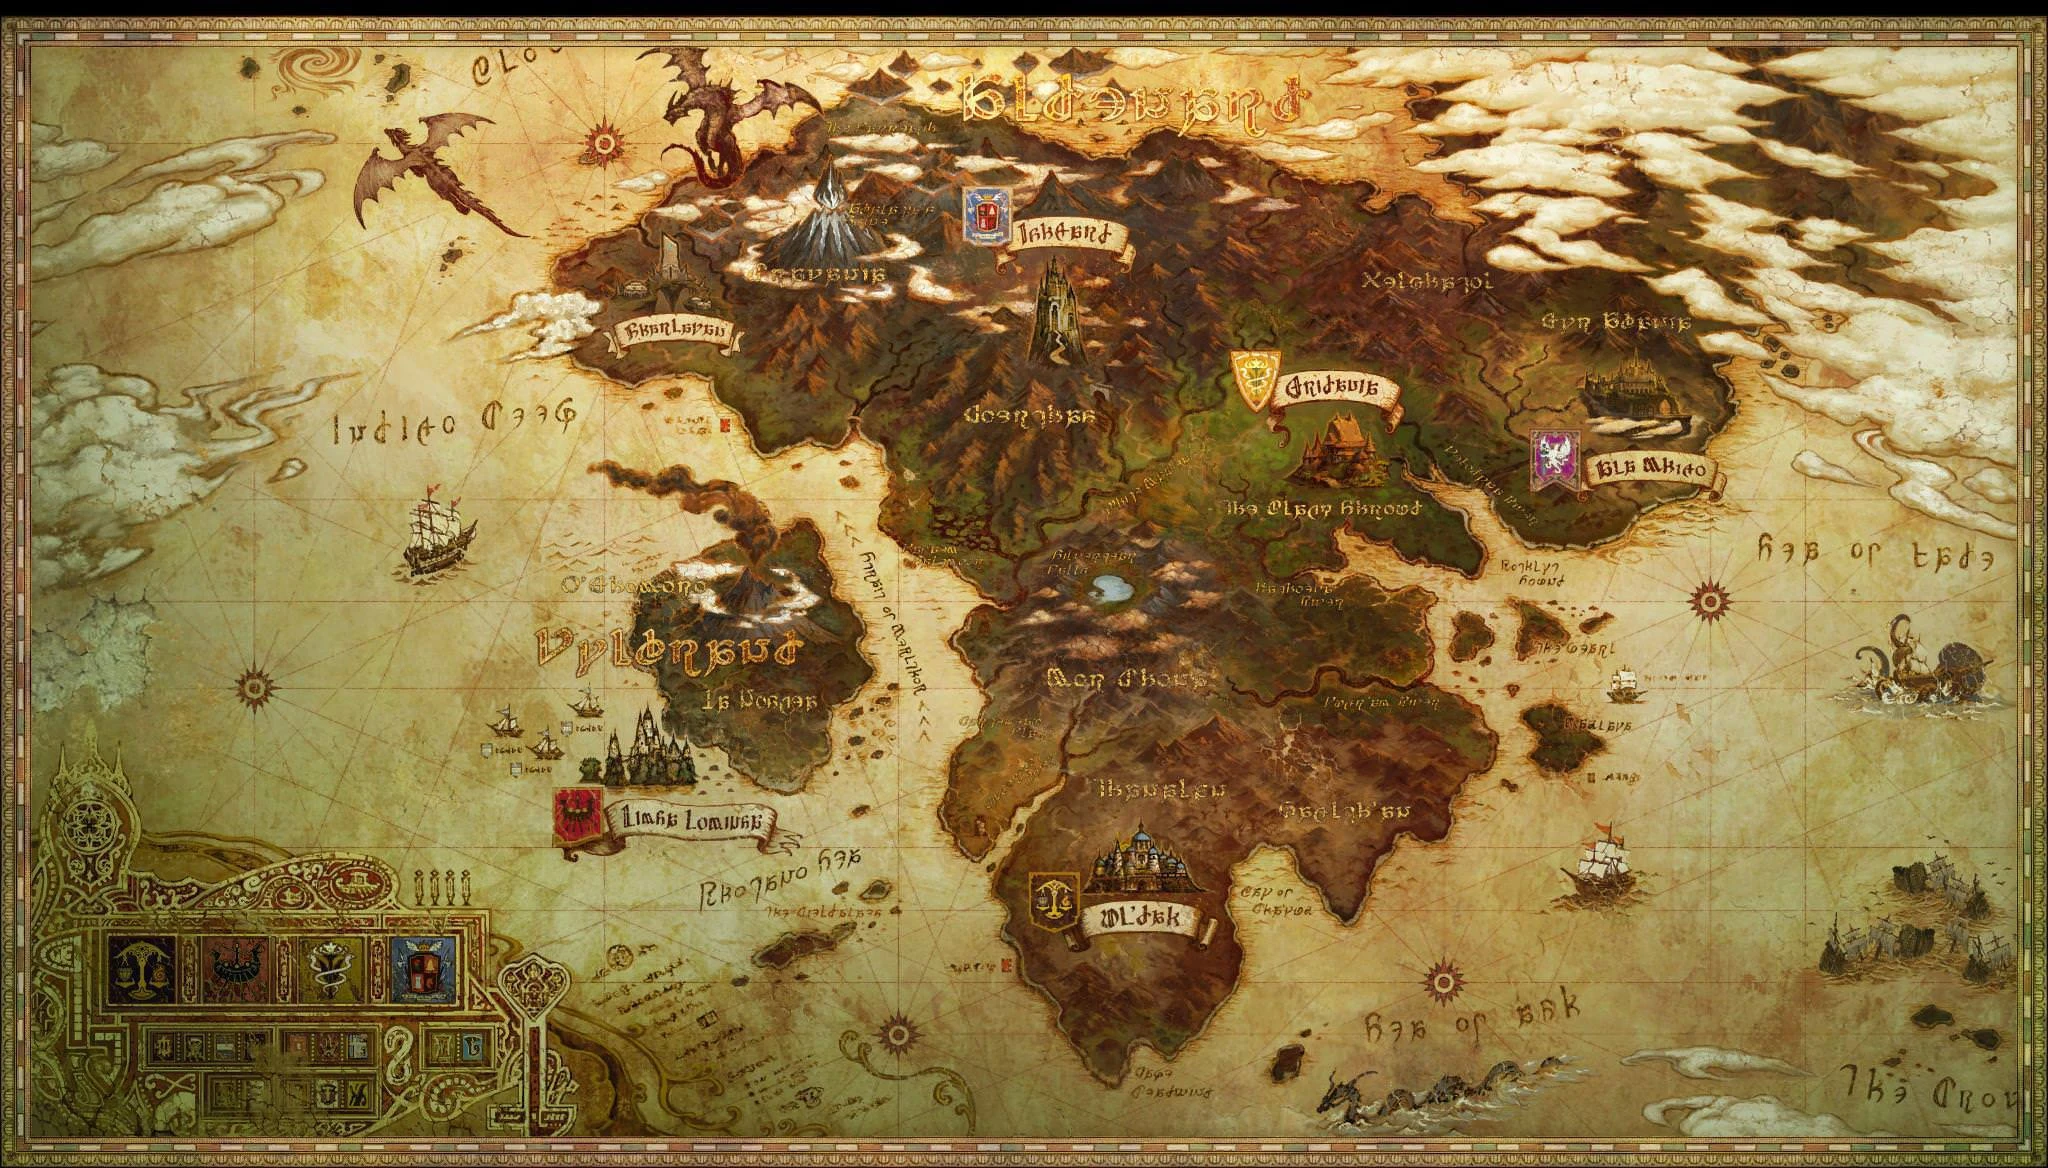 The map of Eorzea